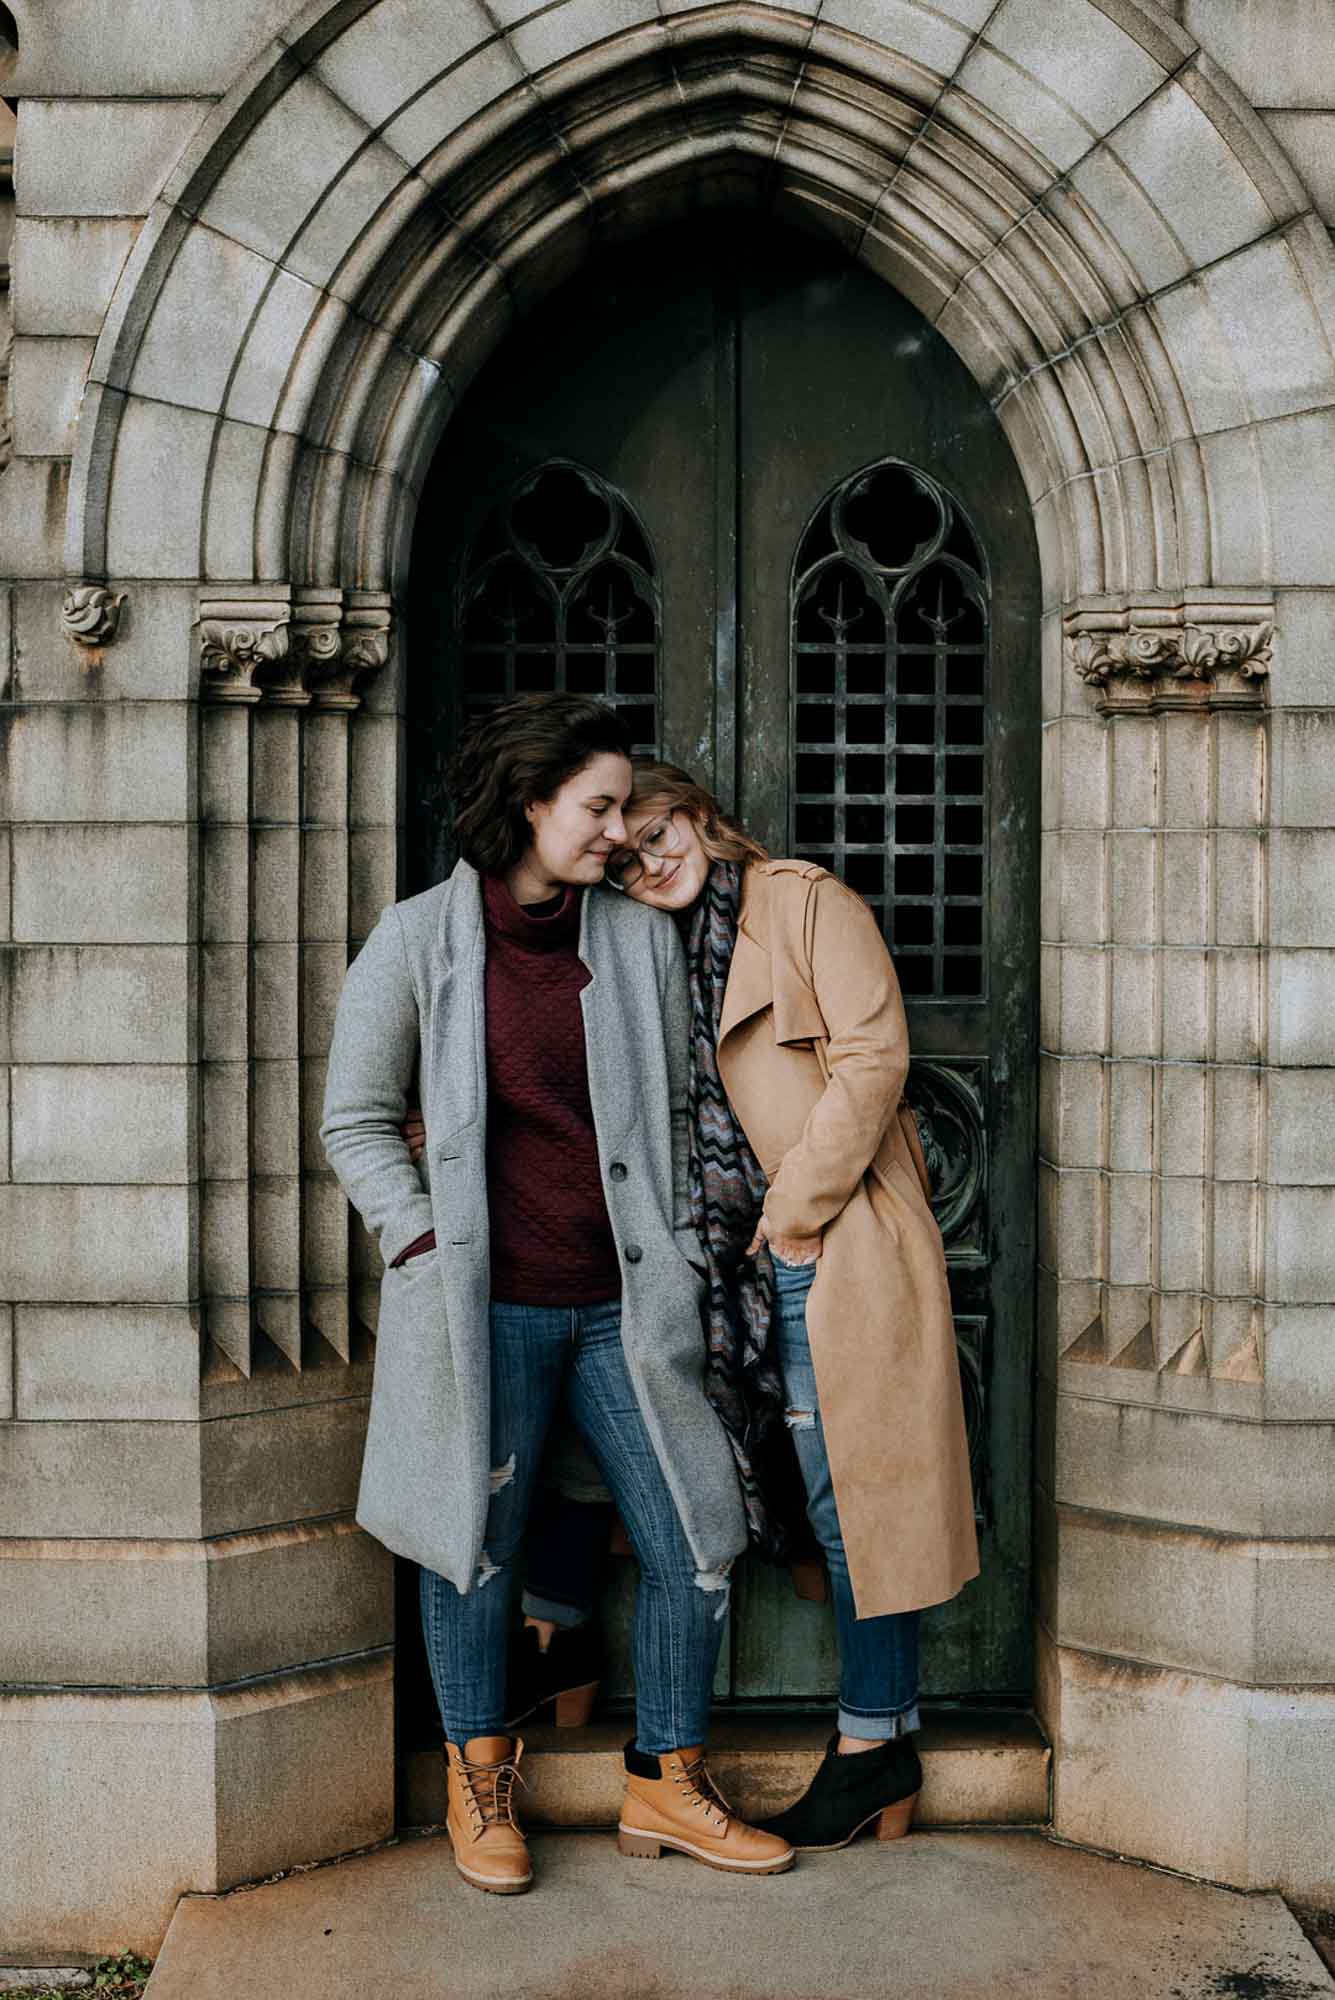 Outdoor engagement session in Atlanta after double proposal | Krisandra Evans Photography | Featured on Equally Wed, the leading LGBTQ+ wedding magazine